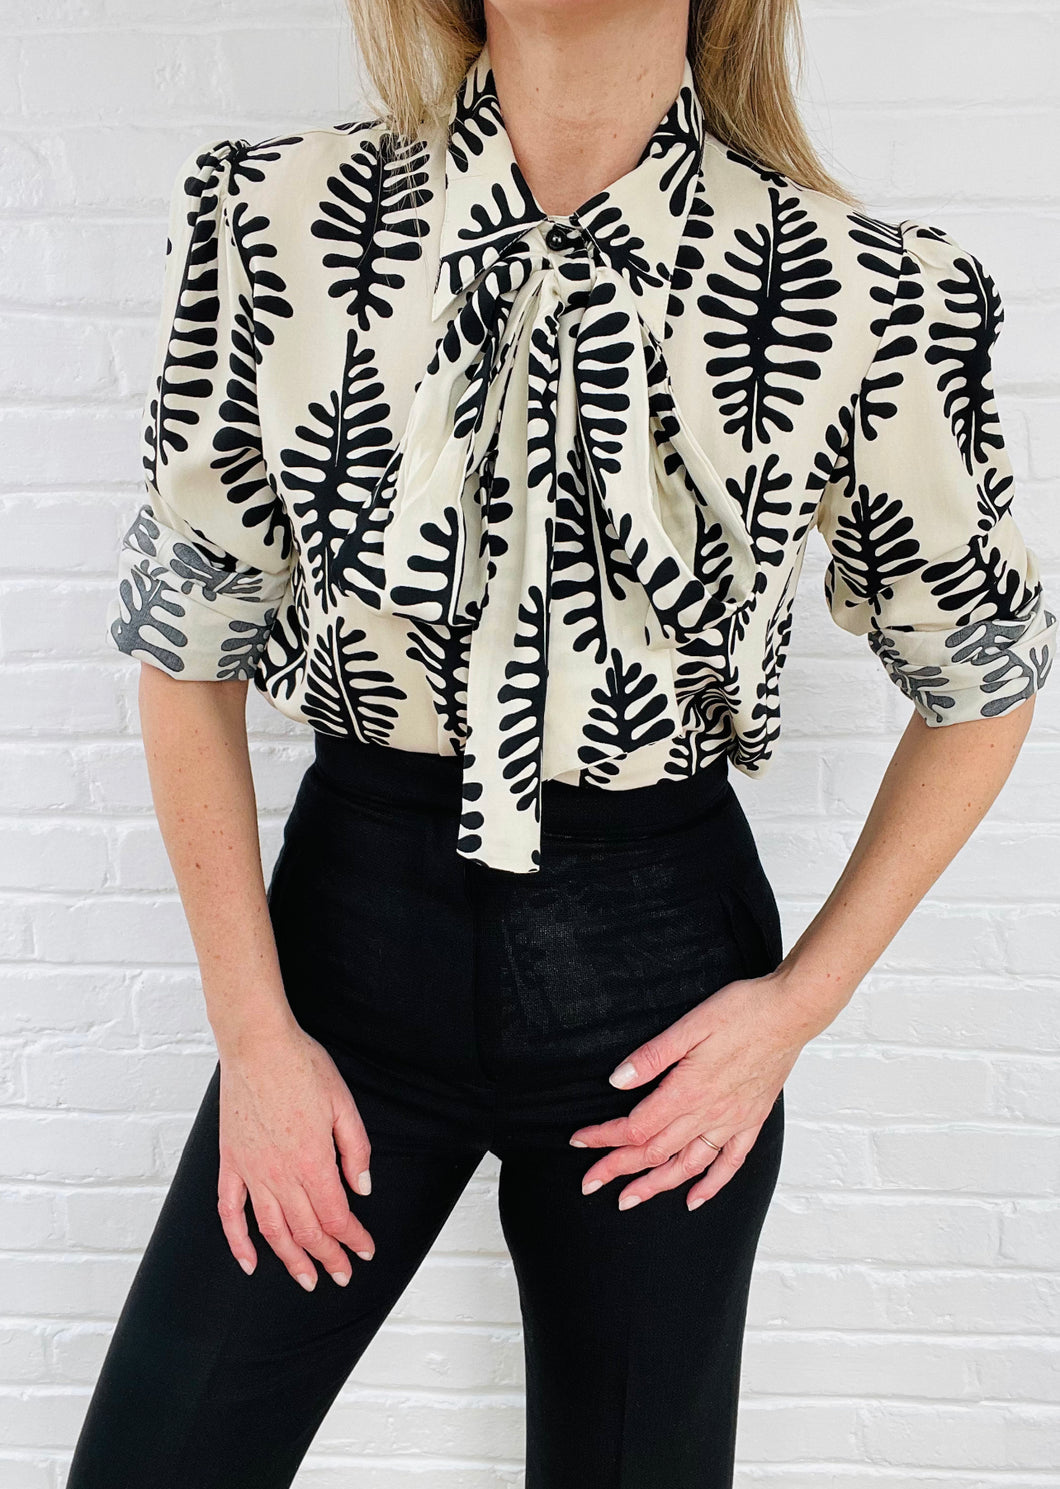 The Matisse Zoe blouse